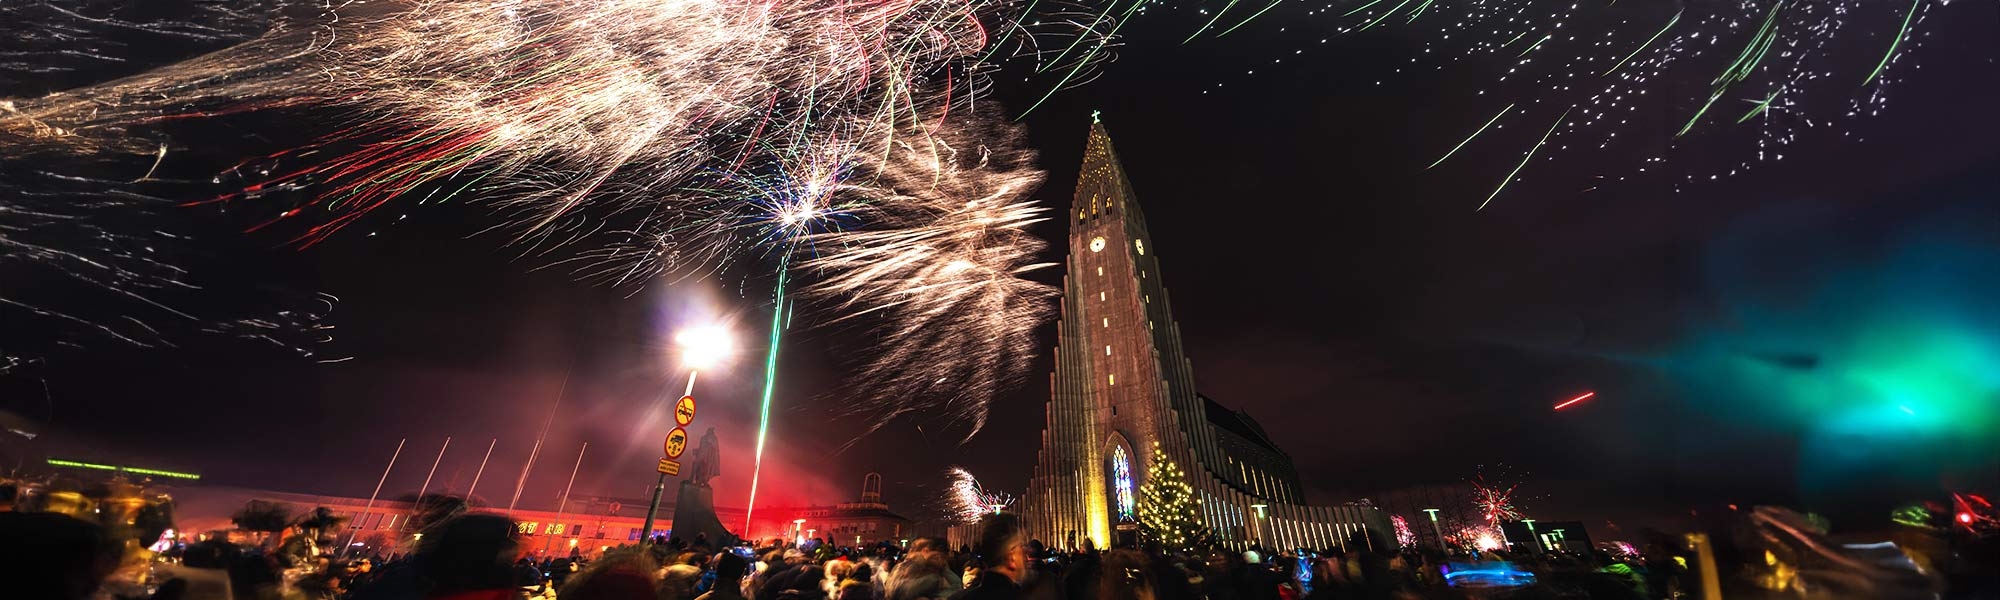 New Year's Eve in Iceland